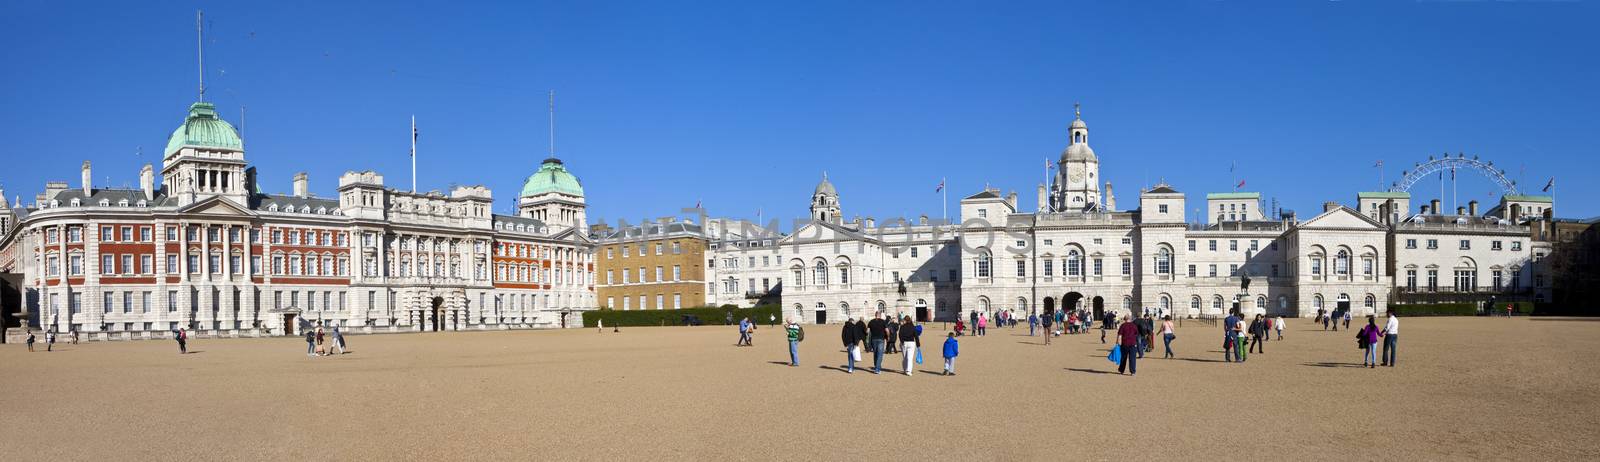 A panoramic view of the impressive Horseguards Parade in London.  The London Eye can be seen in the distance.